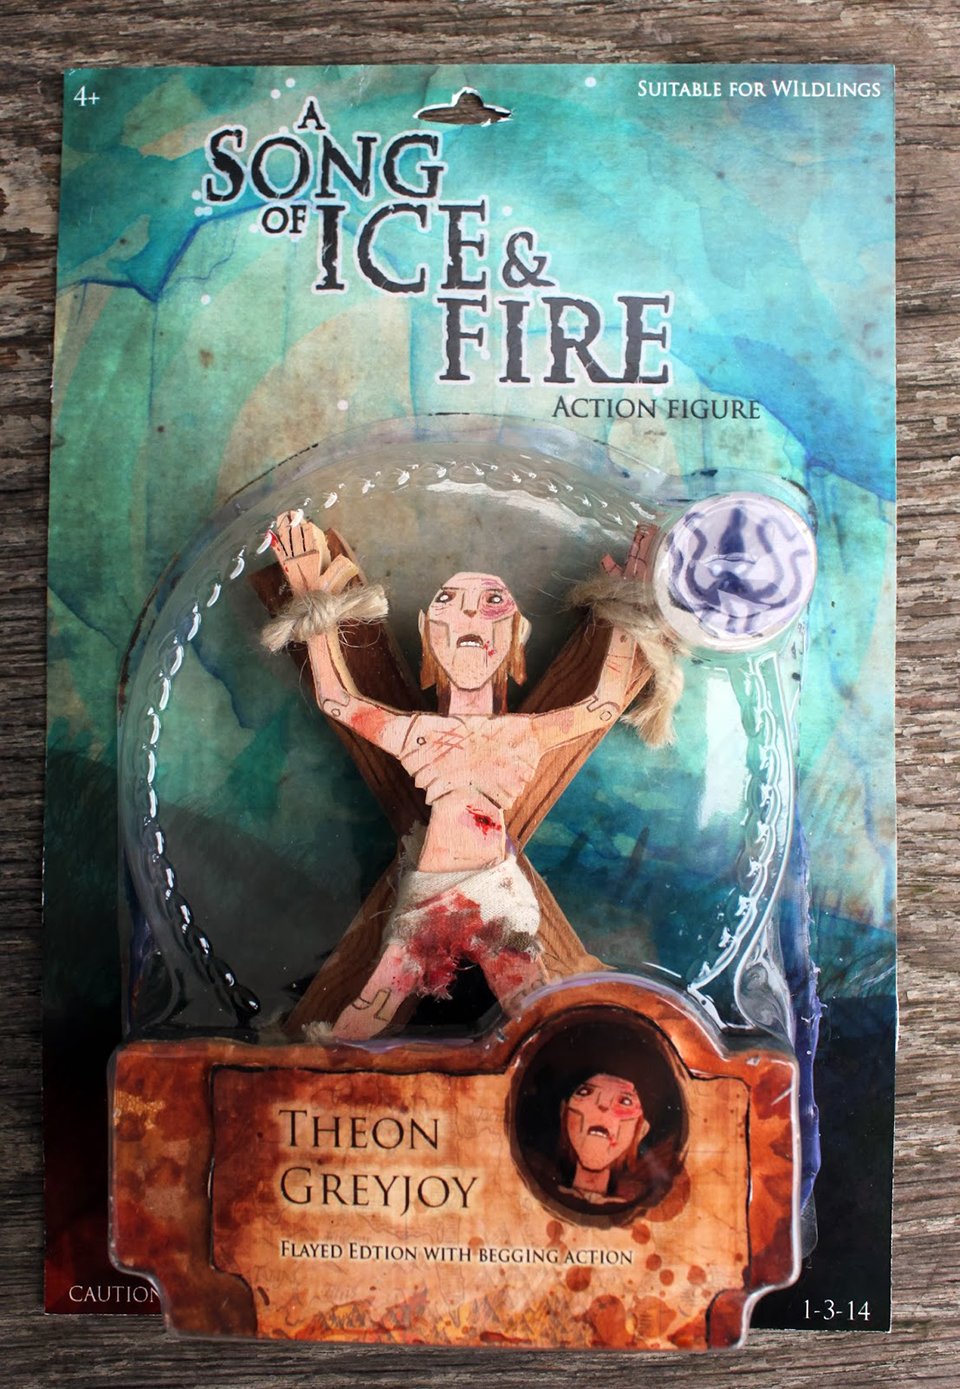 Game of Thrones Action Figures